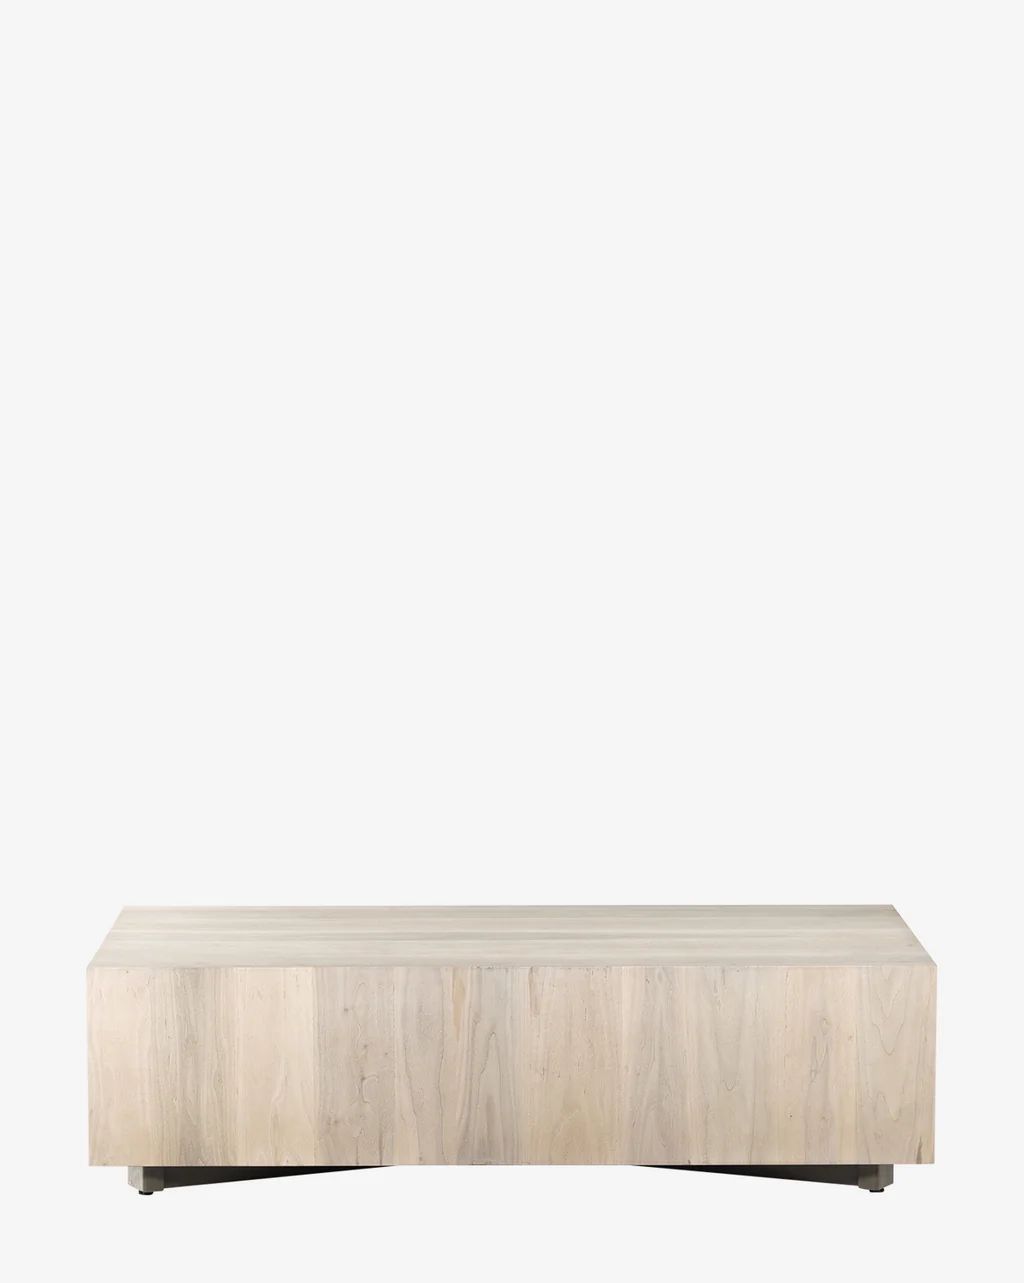 Cather Coffee Table | McGee & Co.